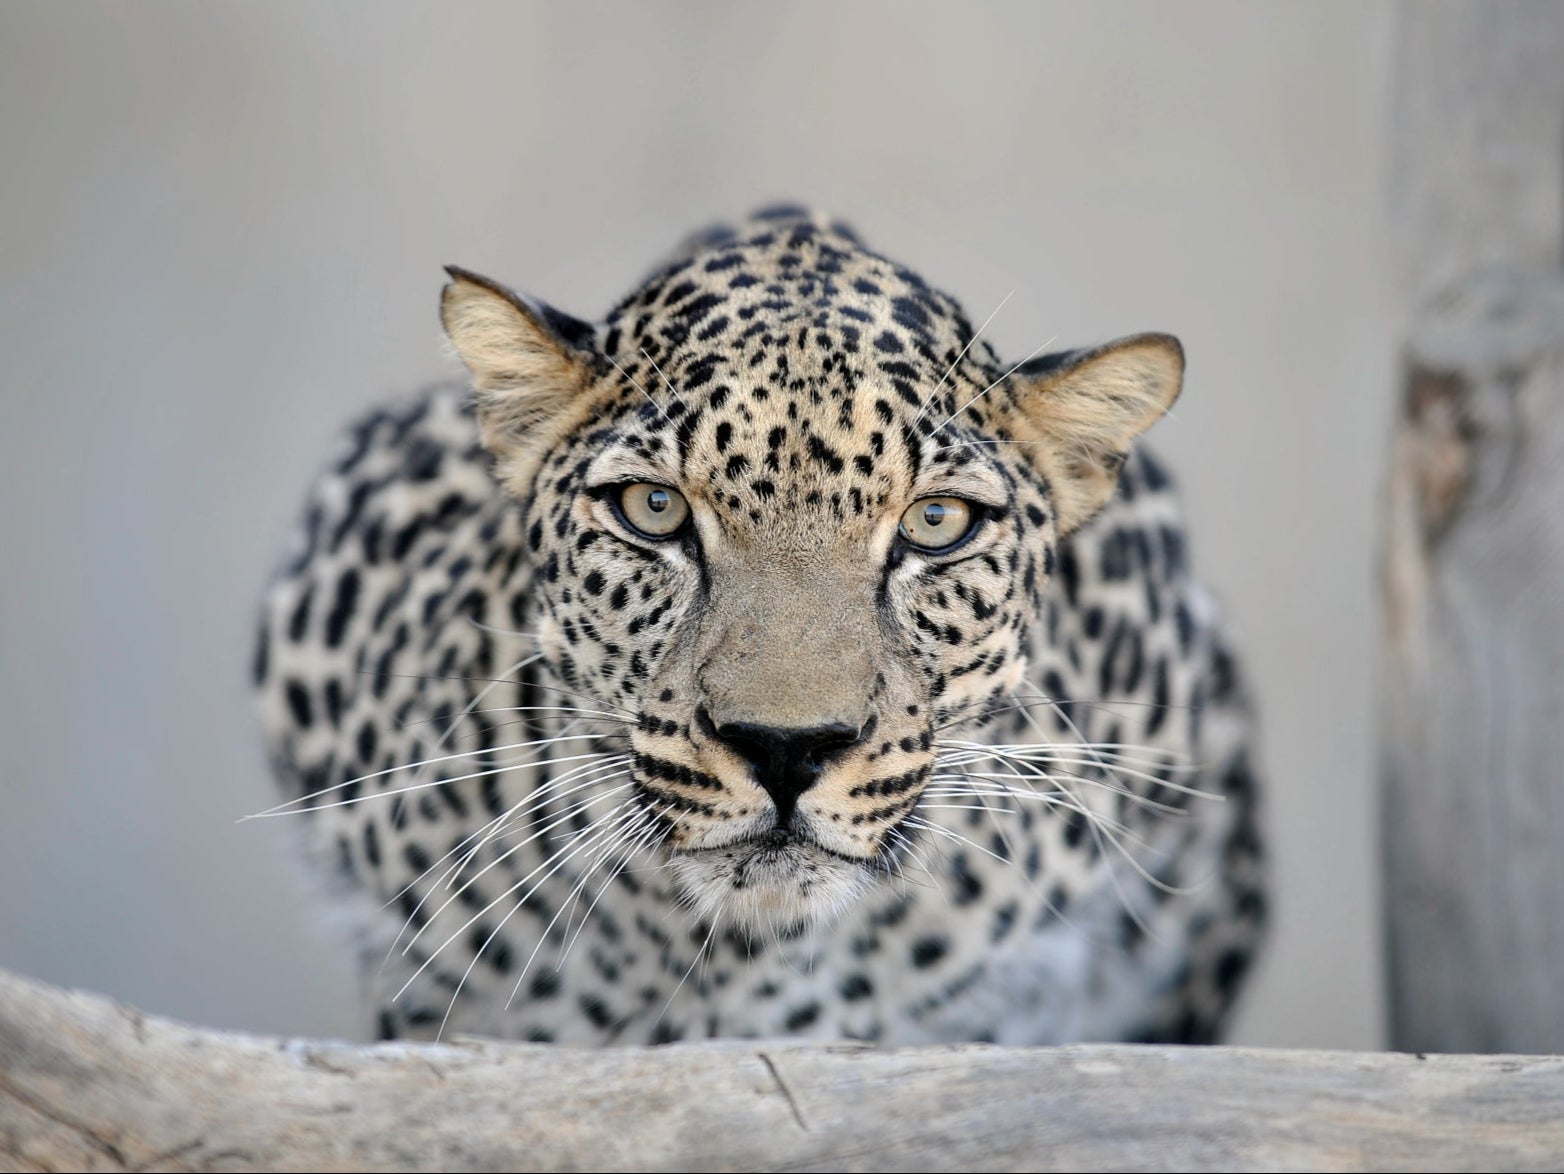 The Arabian leopard is currently endangered but a rewilding initiative is looking to change that